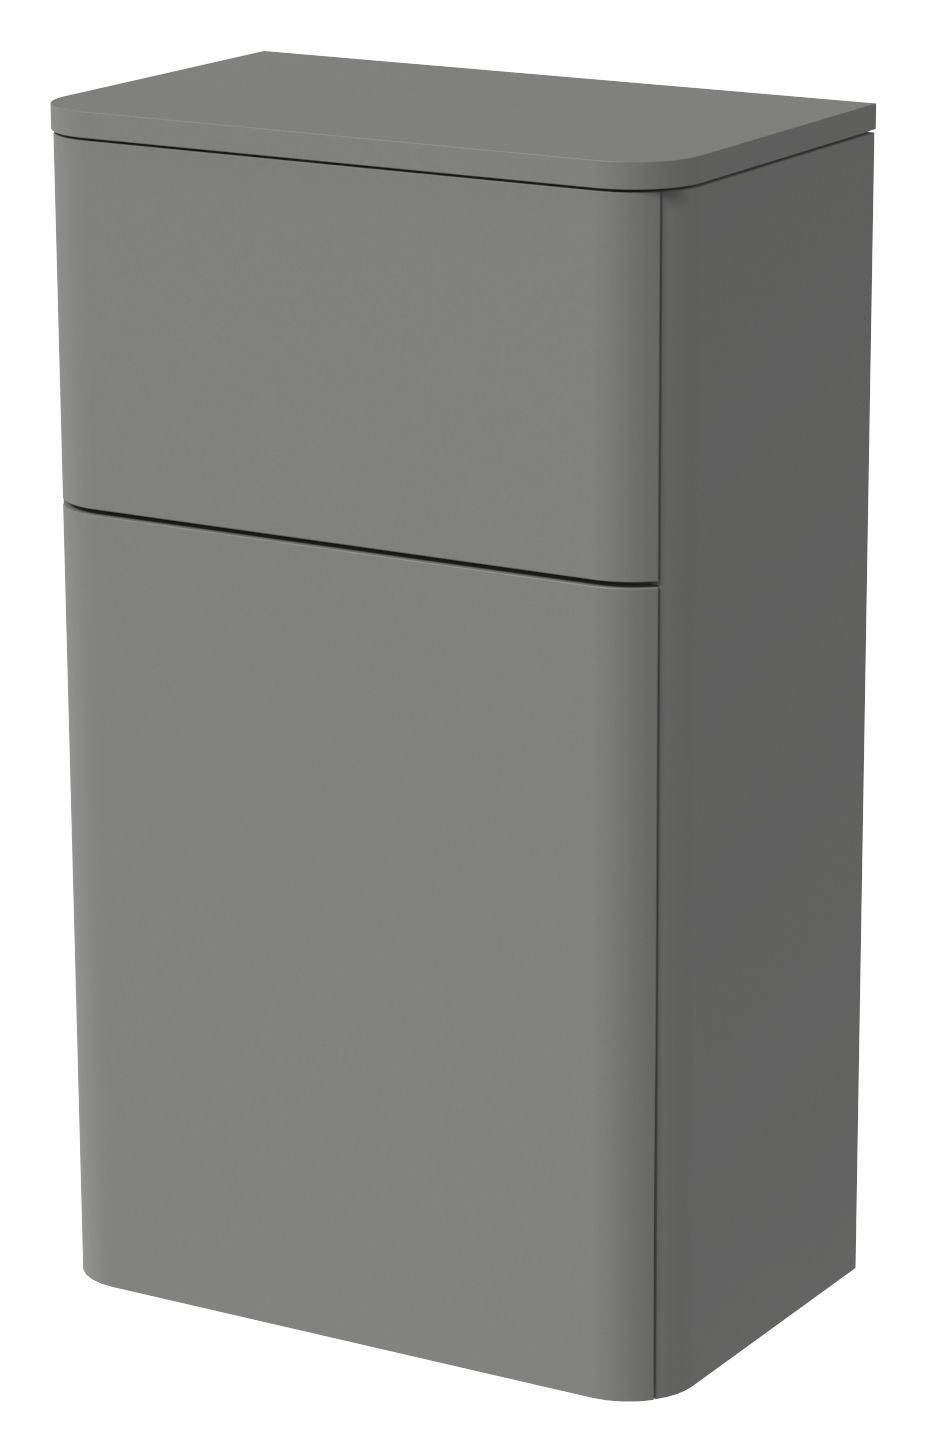 Image of Wickes Malmo Dust Grey Freestanding Toilet Unit - 832 x 500mm